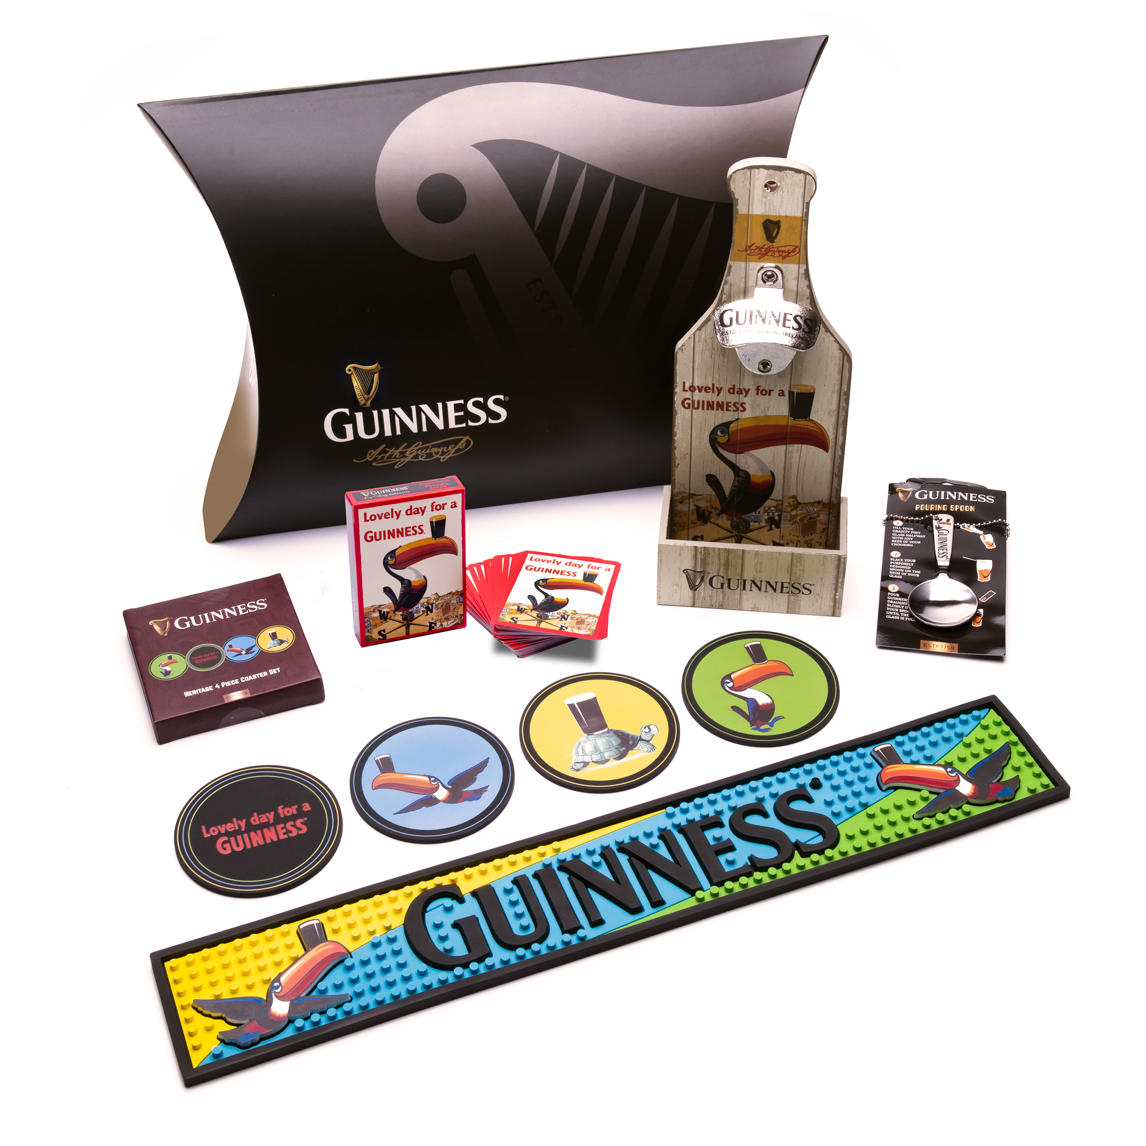 Get your hands on the Guinness Ultimate Toucan Home Bar Pack for the ultimate home bar gift.